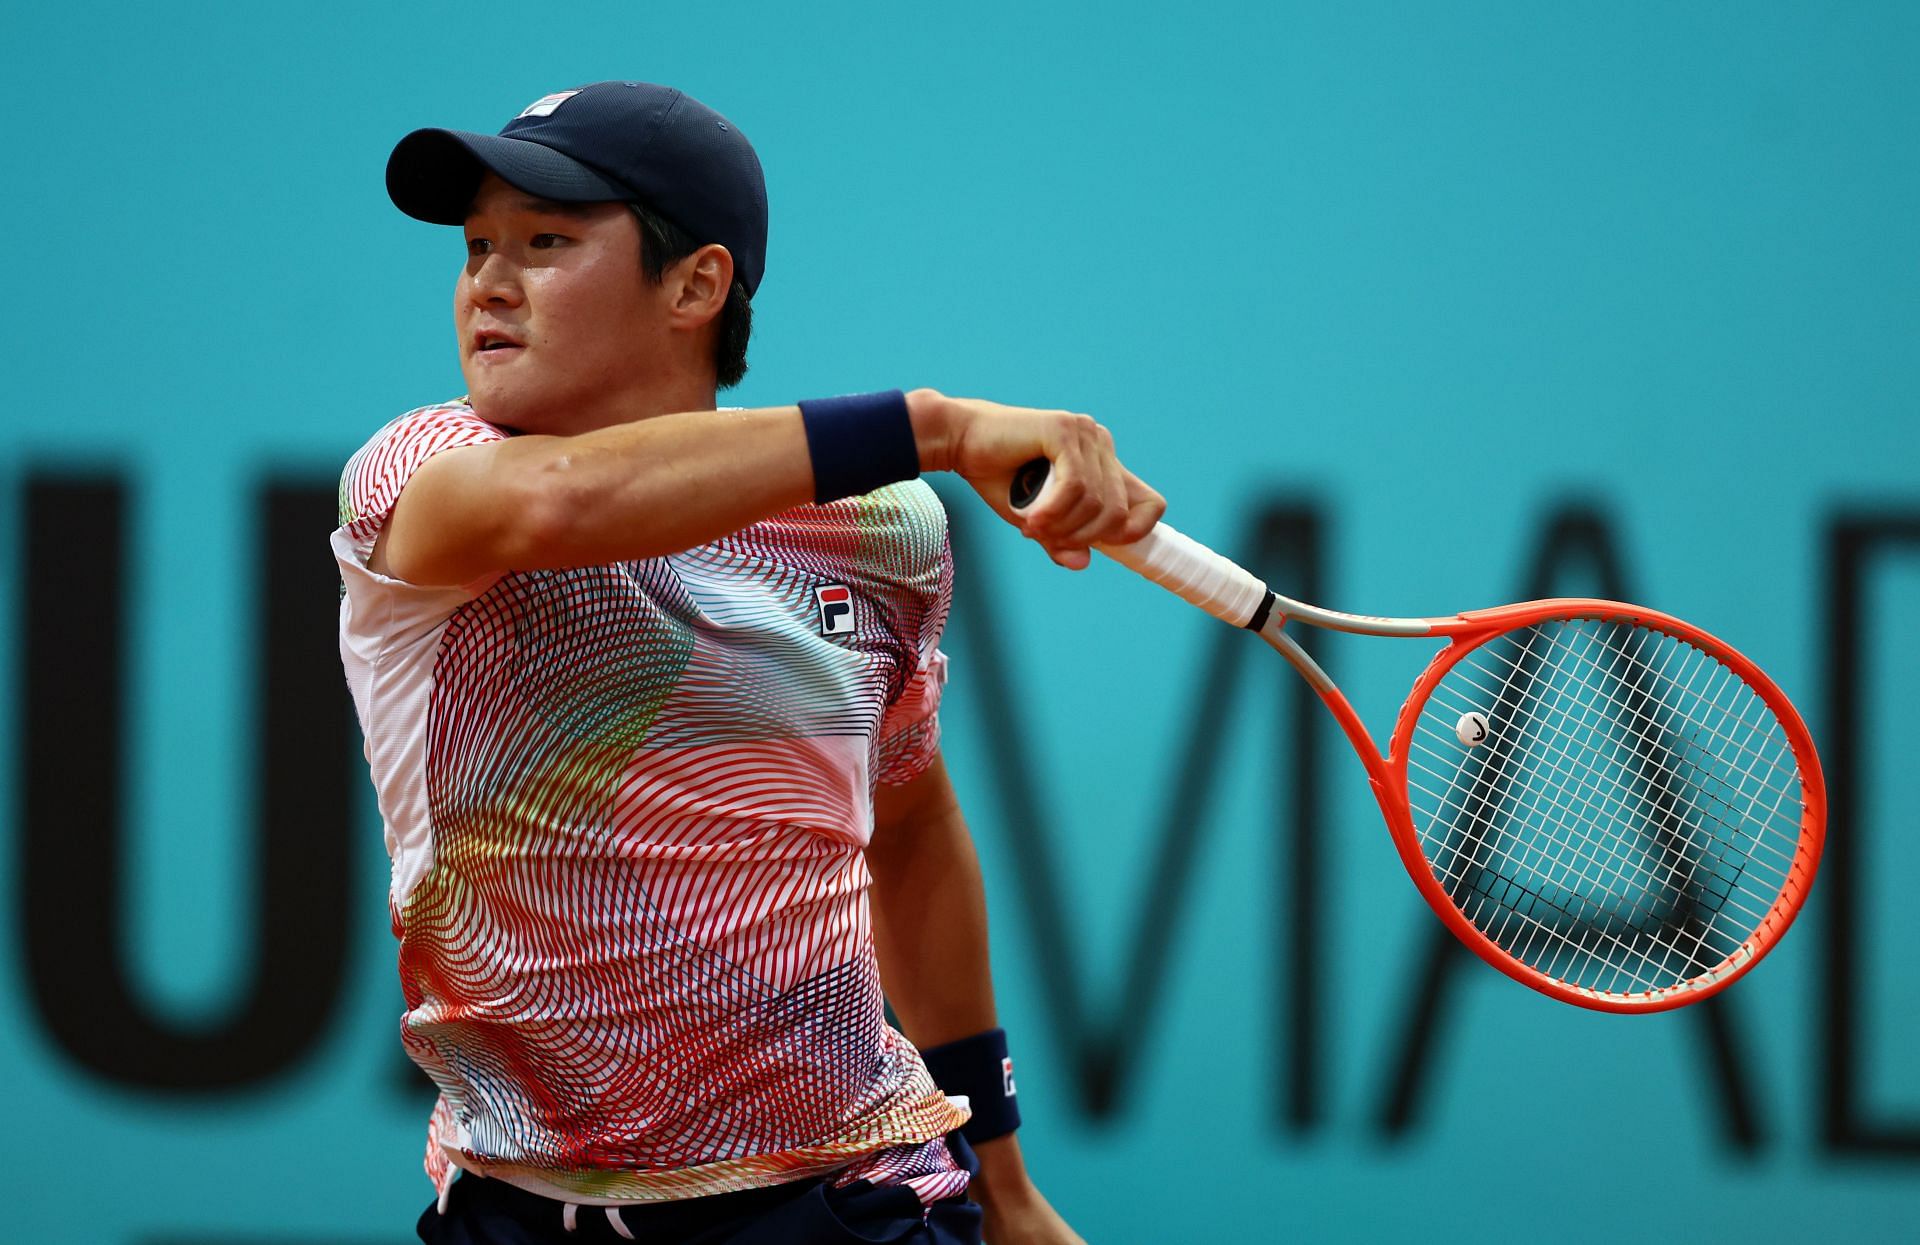 Kwon Soon-woo will face Djokovic for the second time in his career